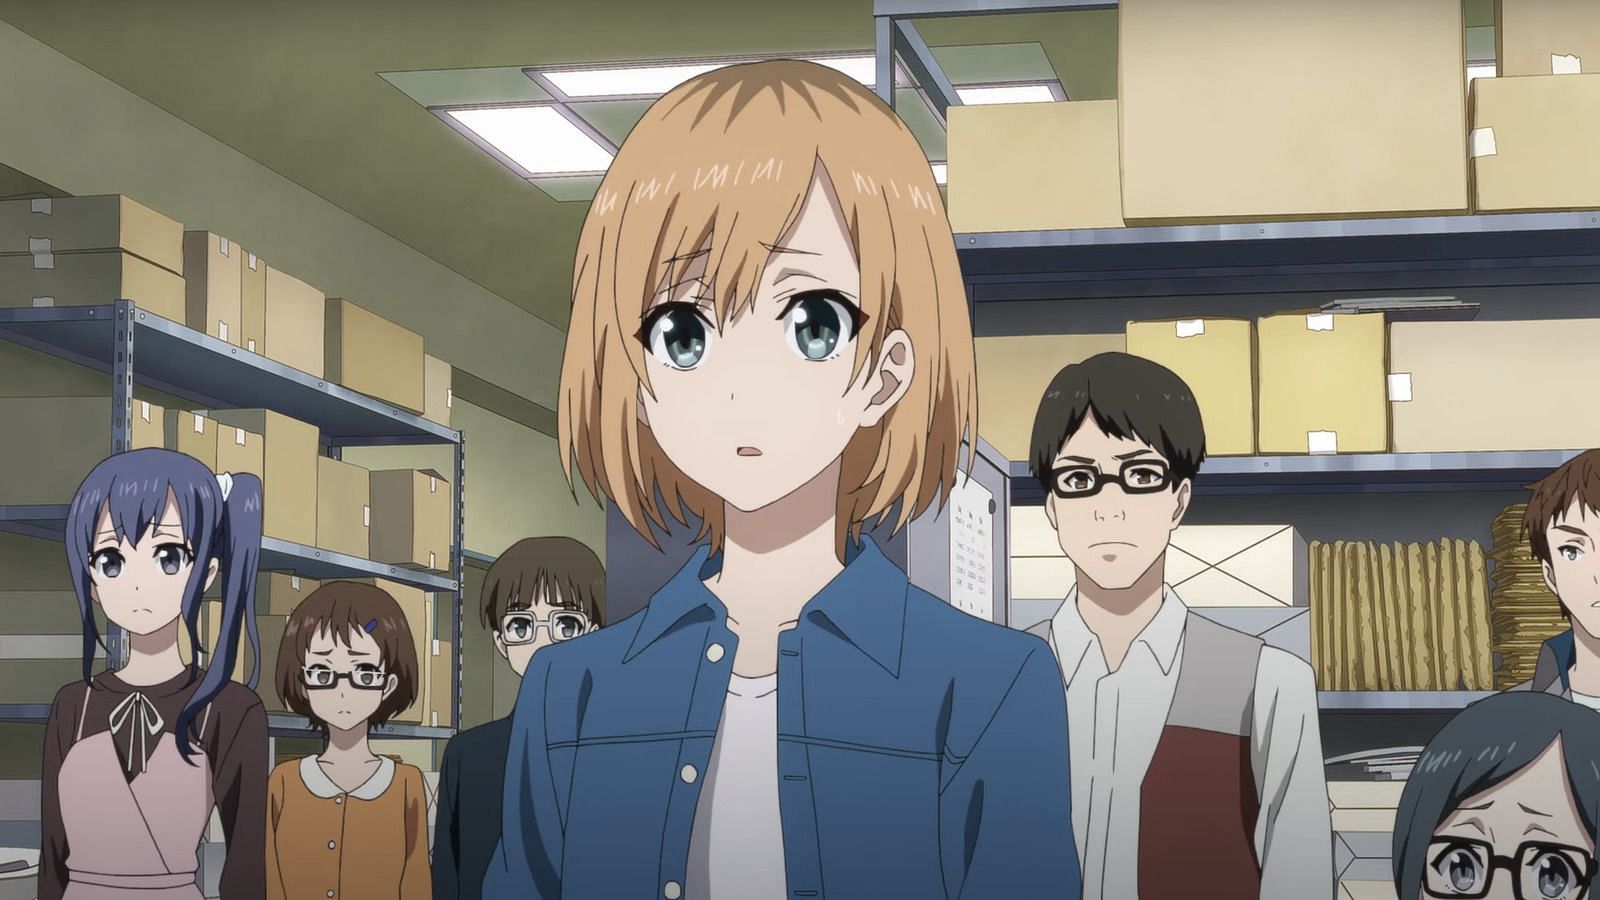 Still from the Shirobako series (Image via P.A.Works)